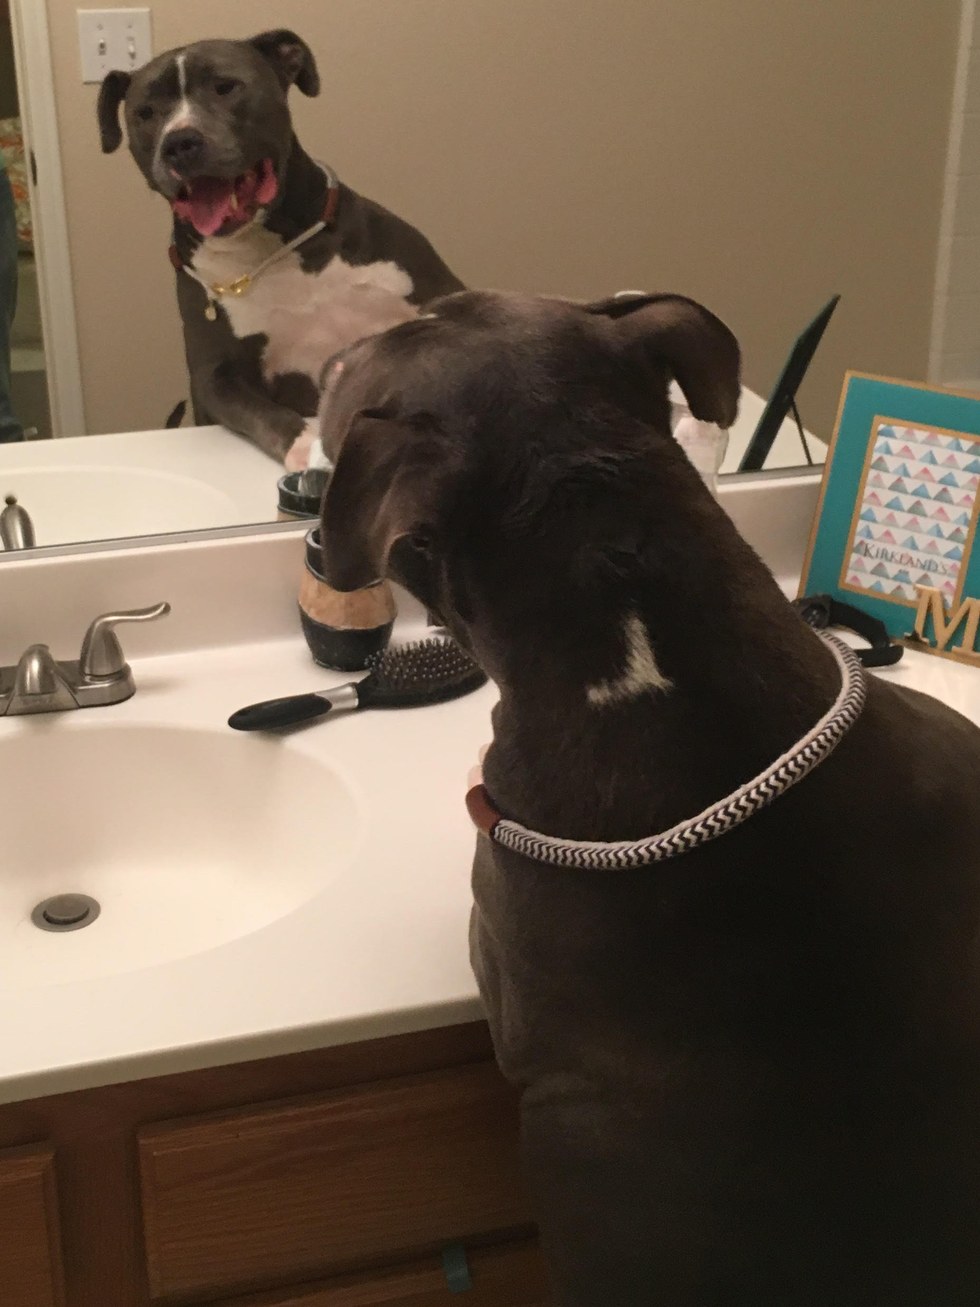 Blue King checking himself out in the mirror